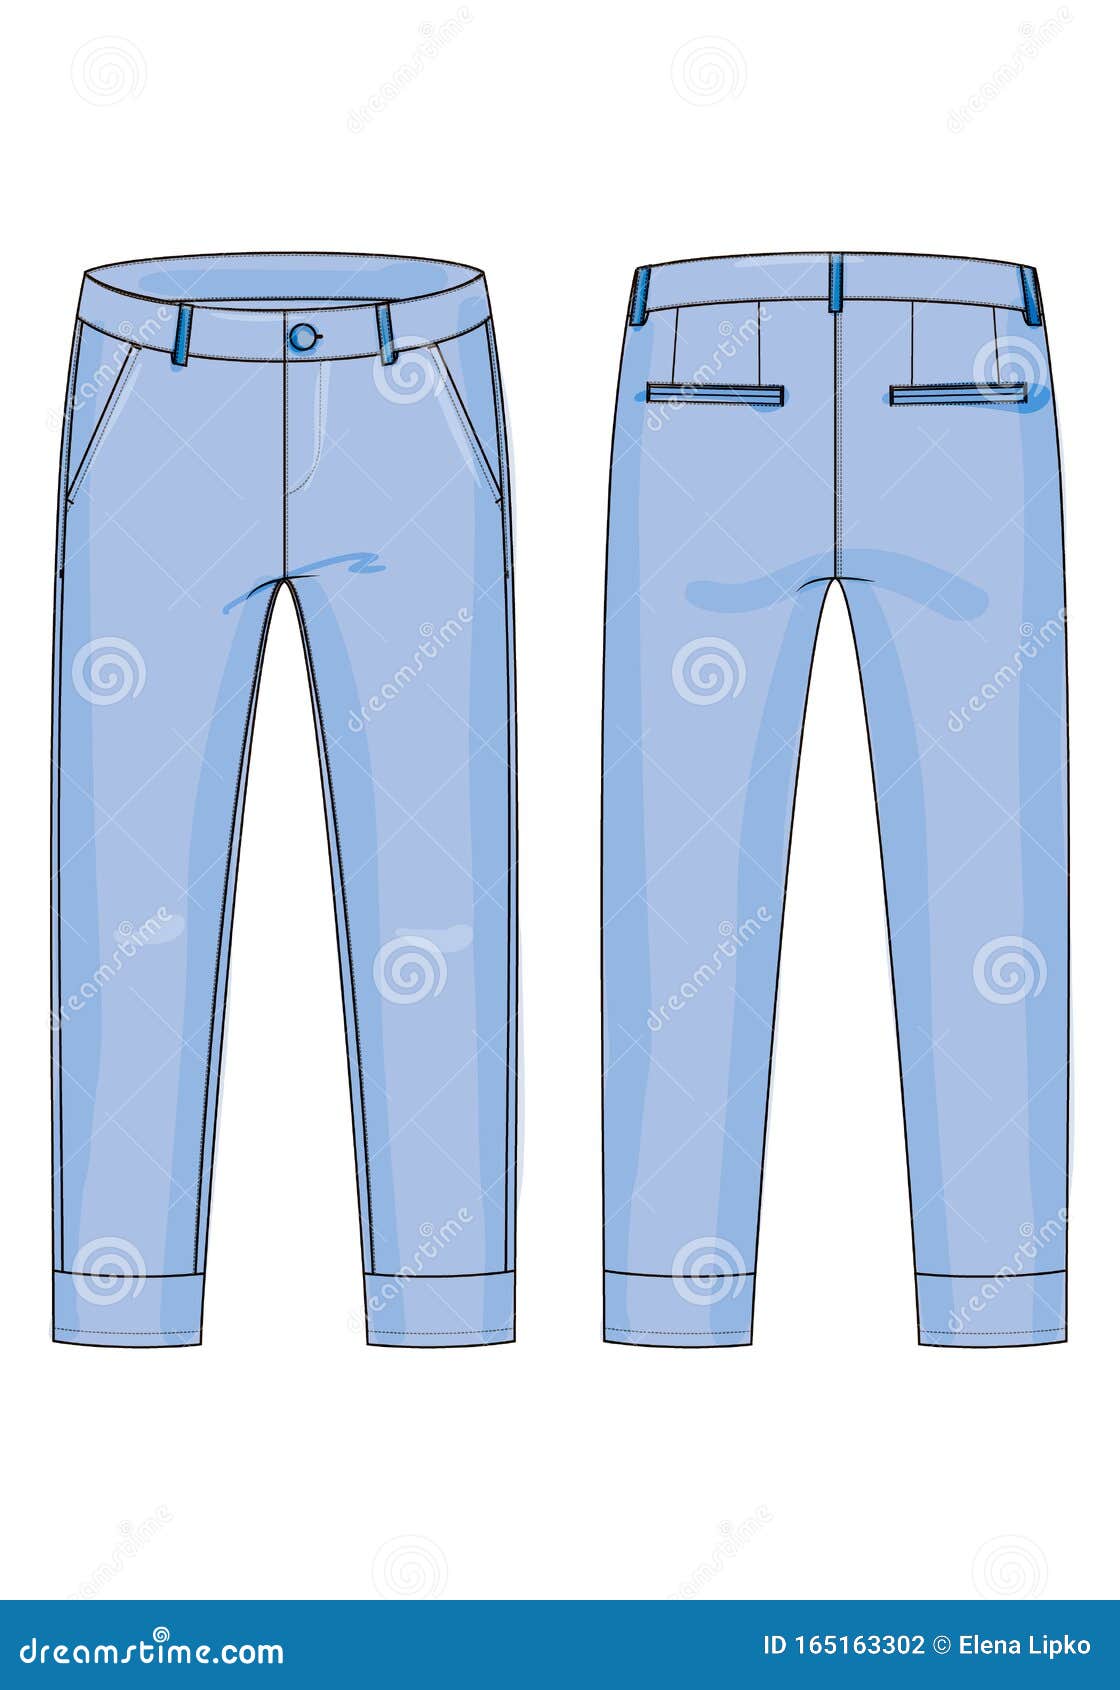 https://thumbs.dreamstime.com/z/fashion-technical-sketch-pants-cuffs-vector-graphic-drawing-trousers-front-back-views-denim-jeans-clothing-stitches-165163302.jpg